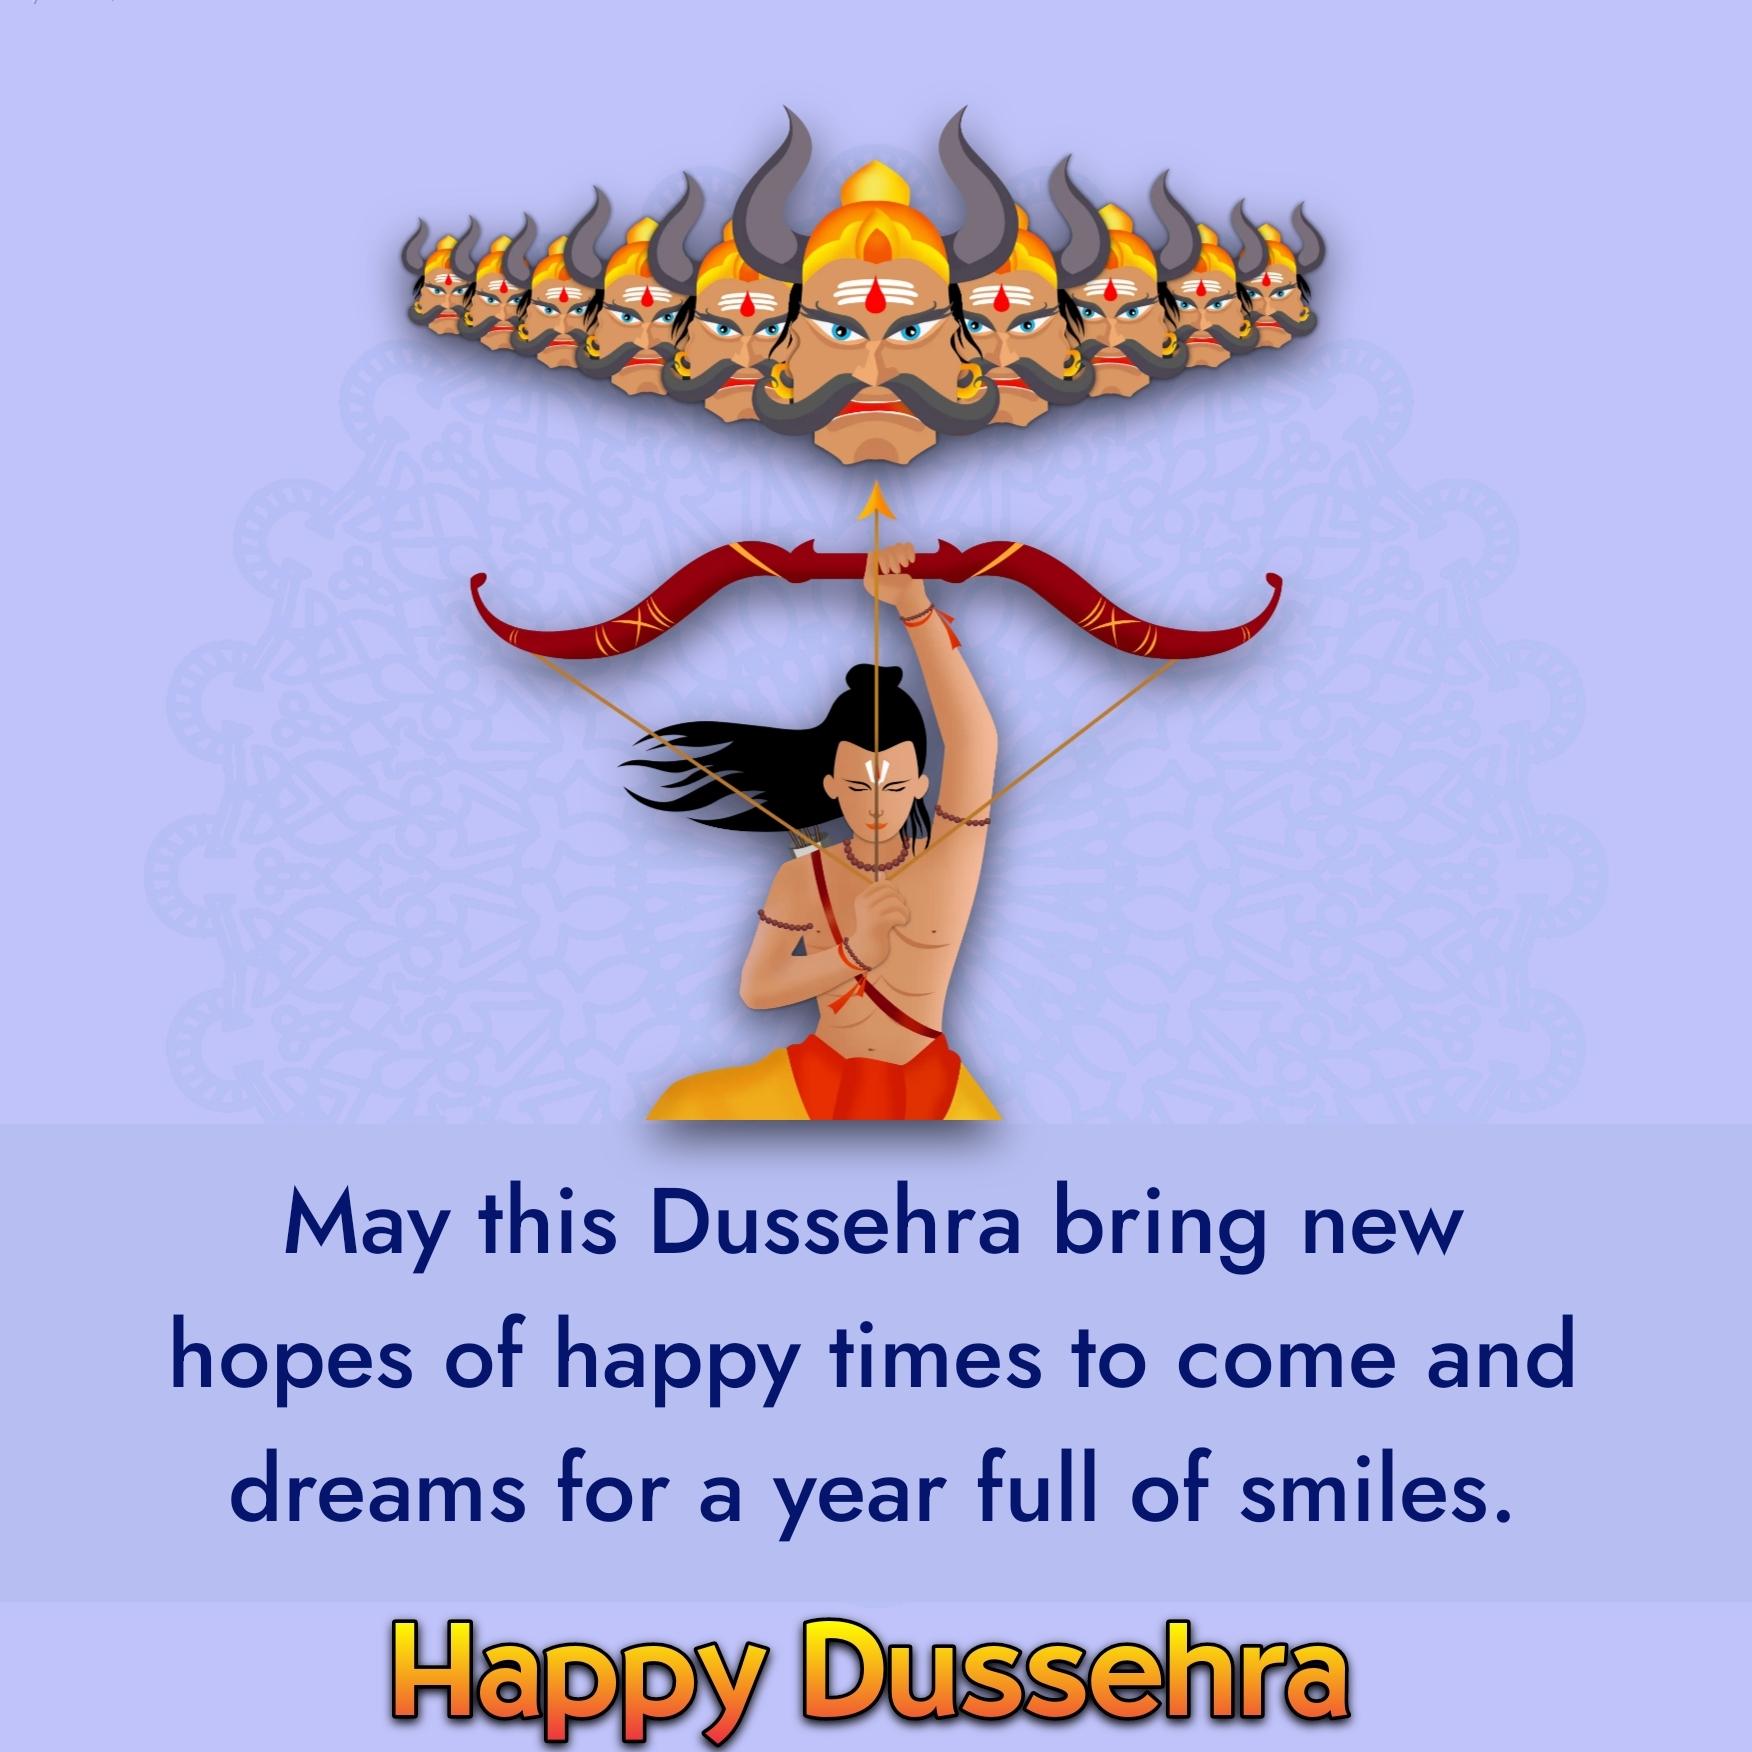 May this Dussehra bring new hopes of happy times